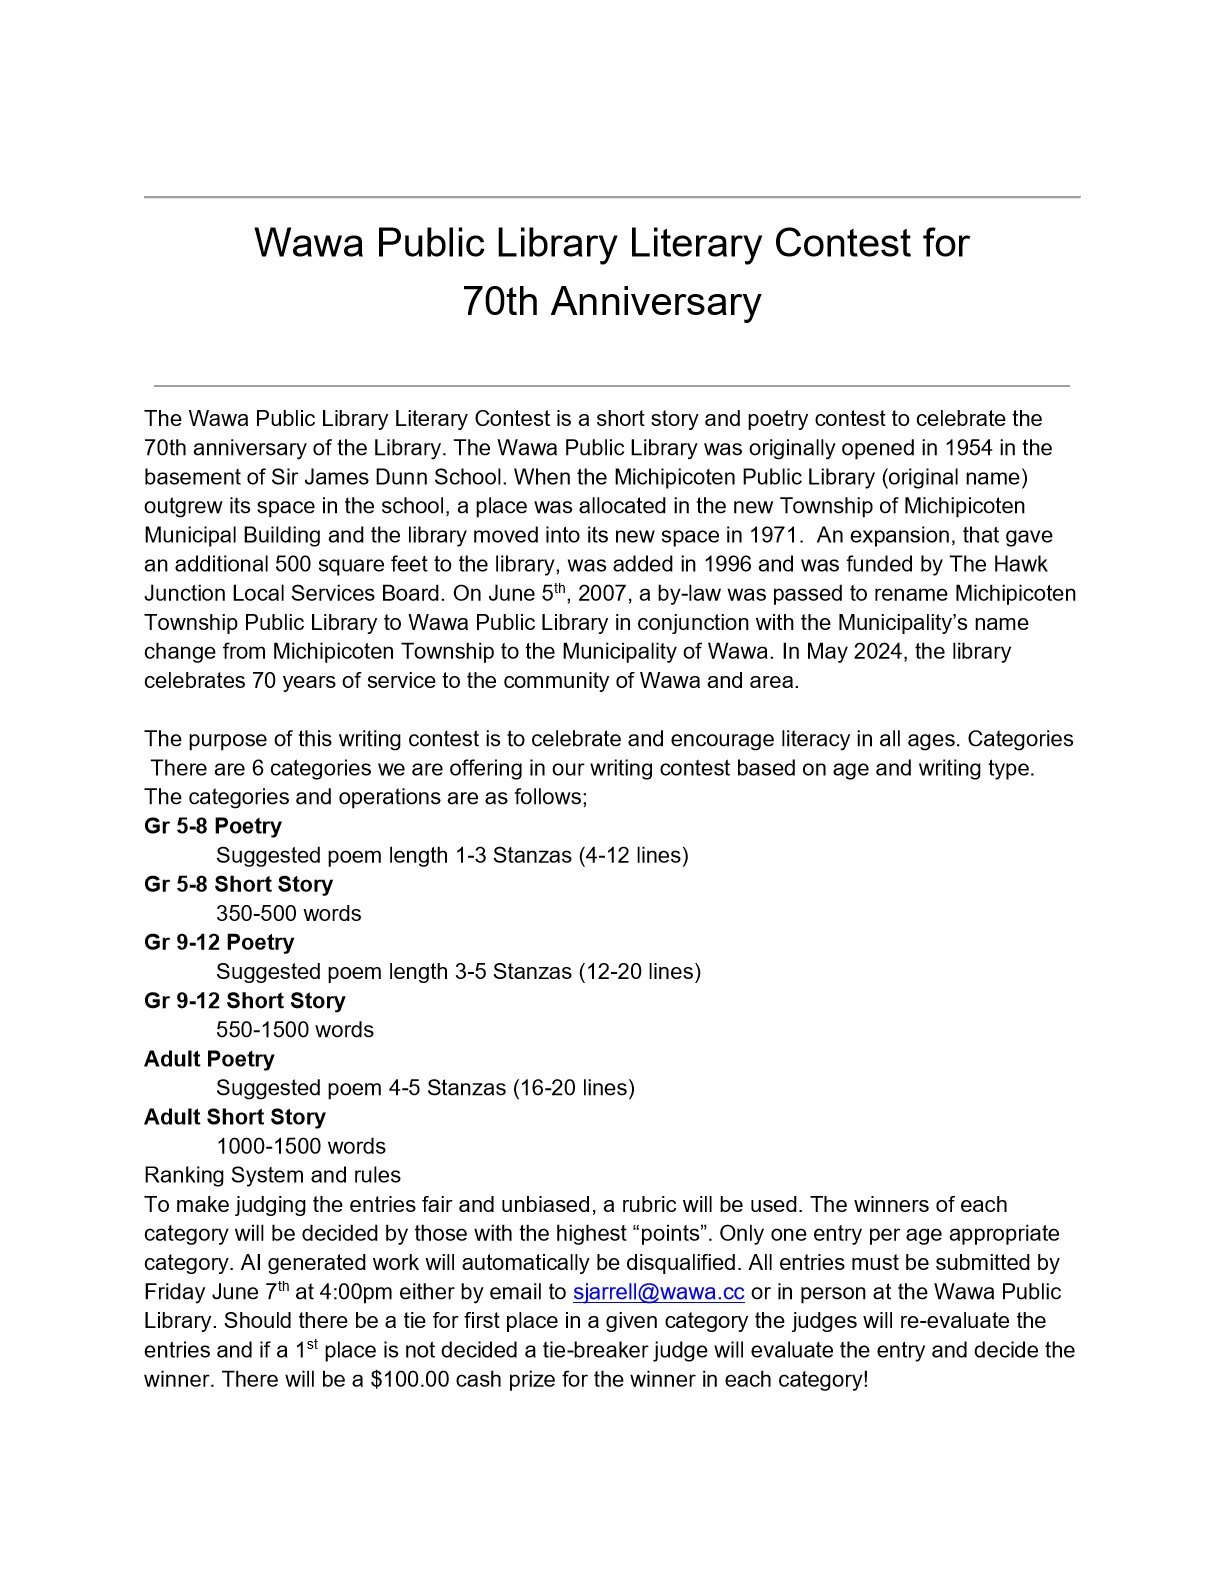 literary contest Rules and Rubix (Updated)_1.jpg